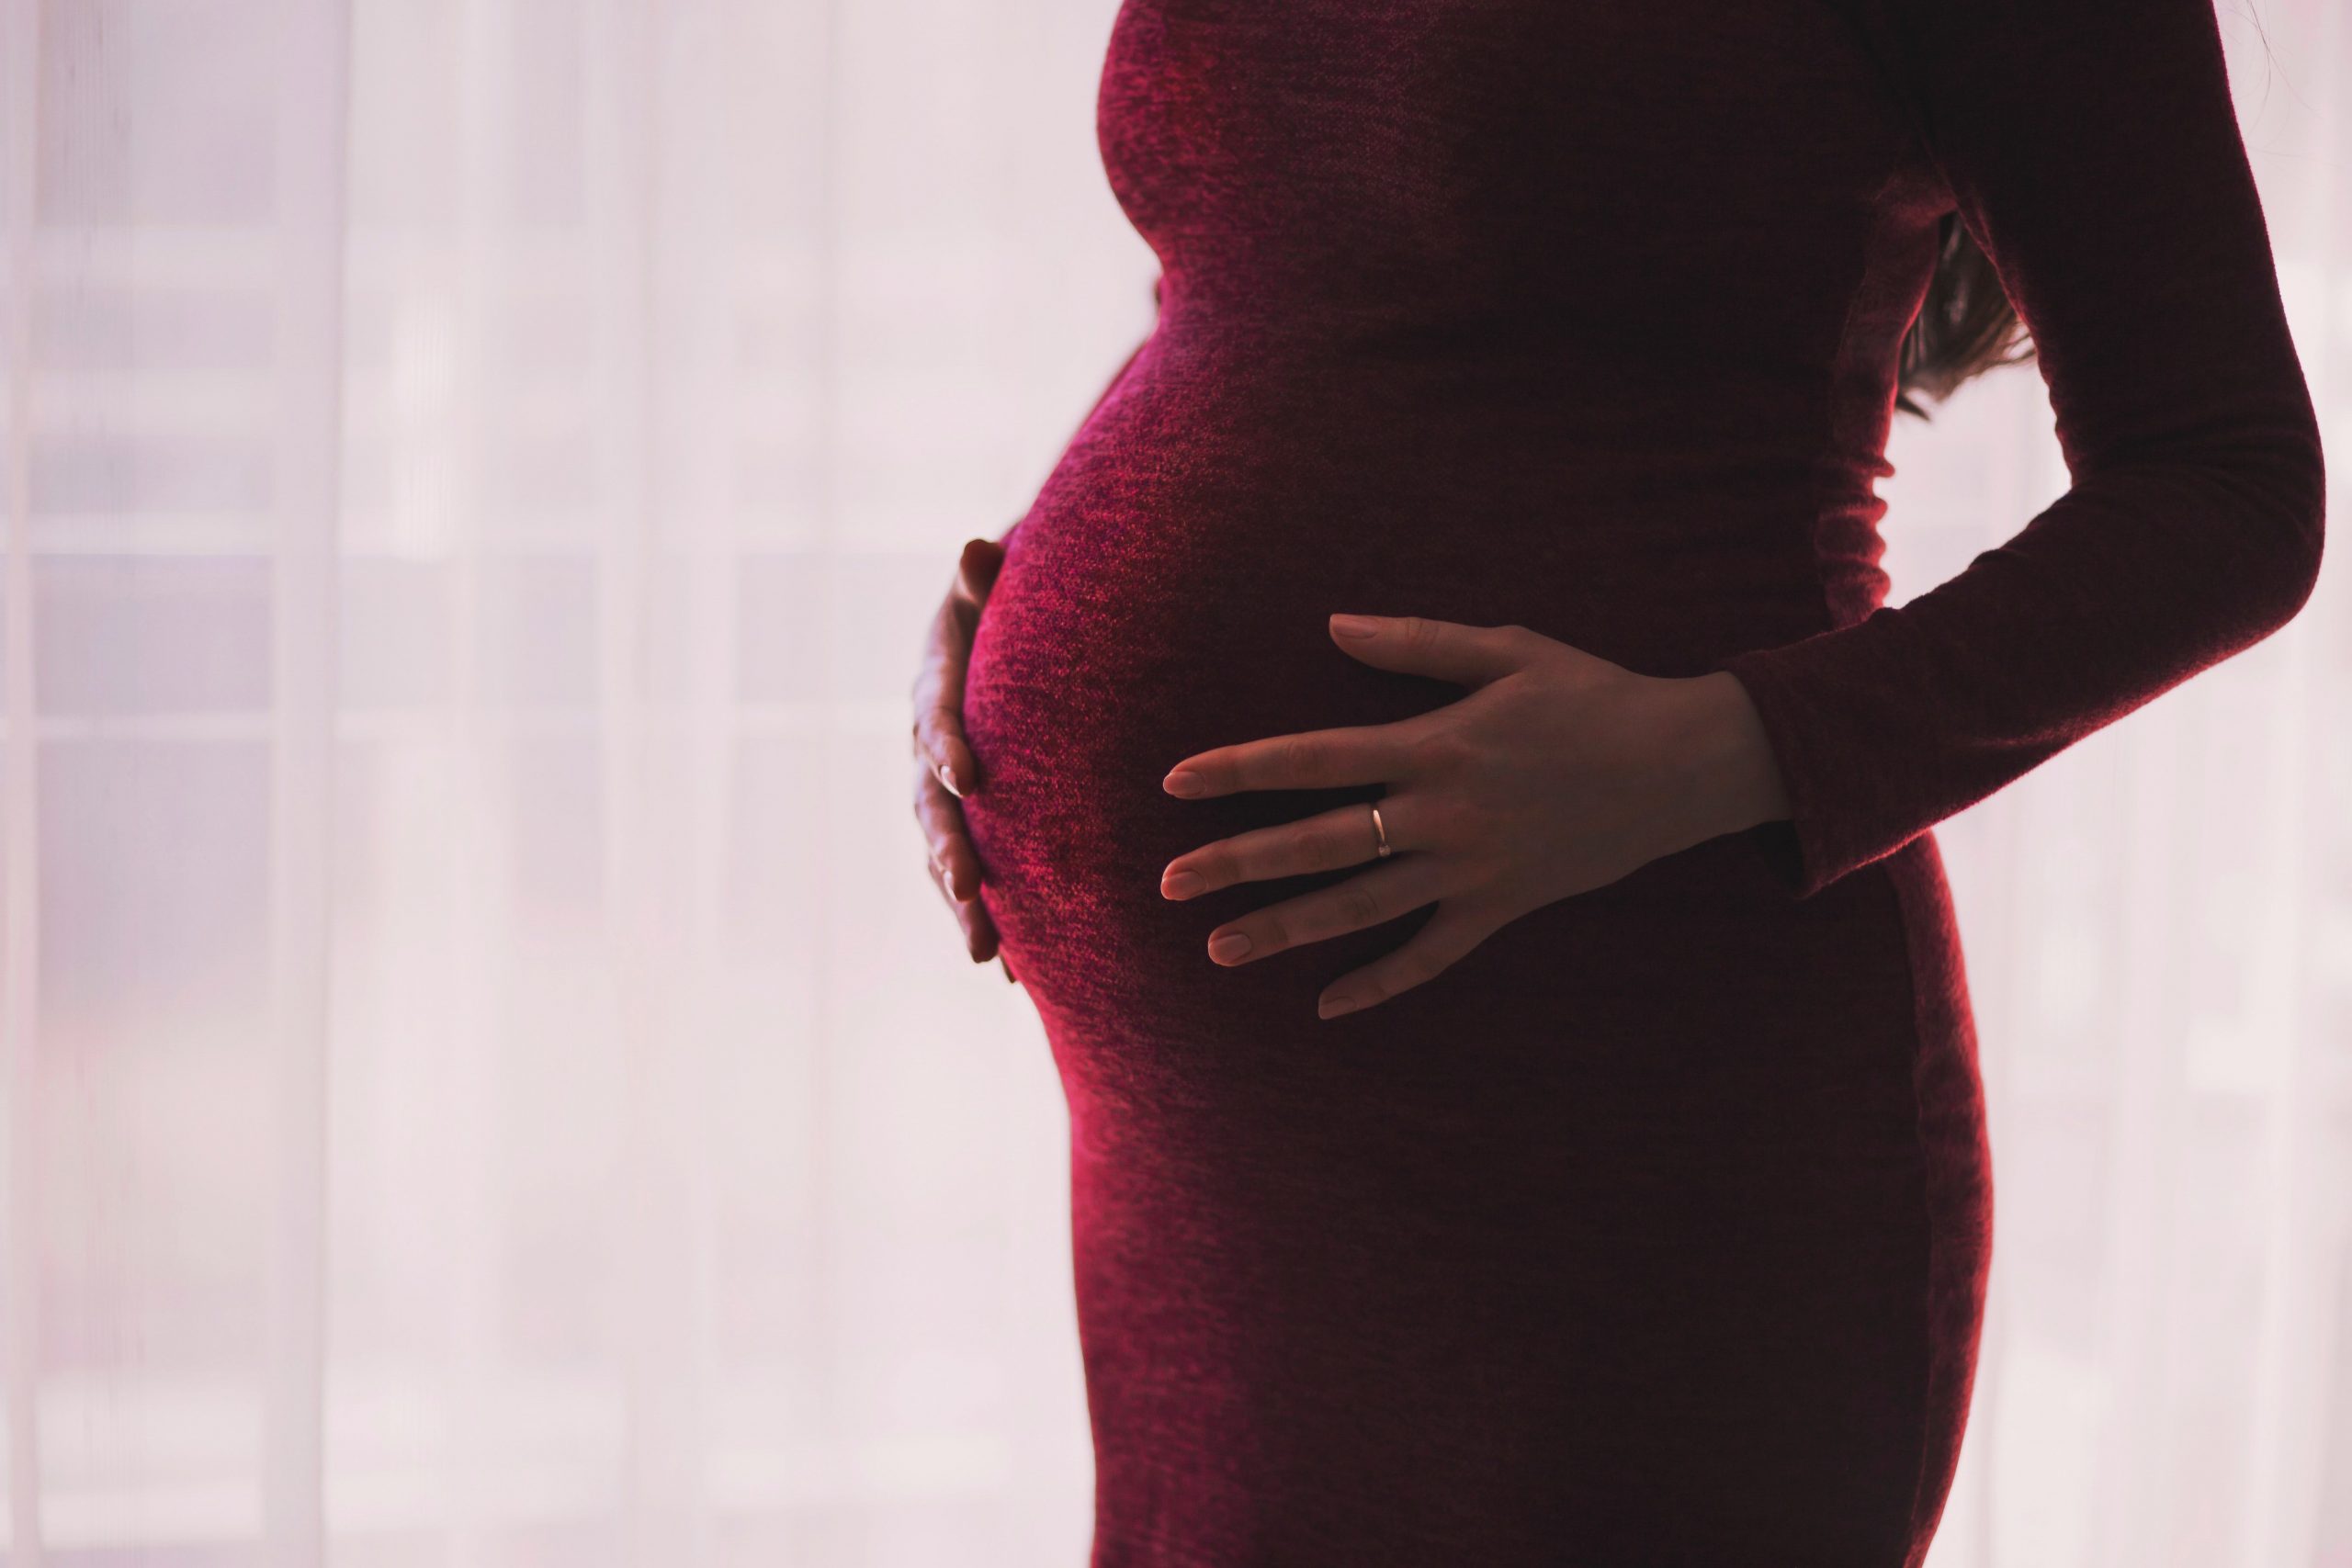 Research shows pregnant women faced more depression during COVID-19